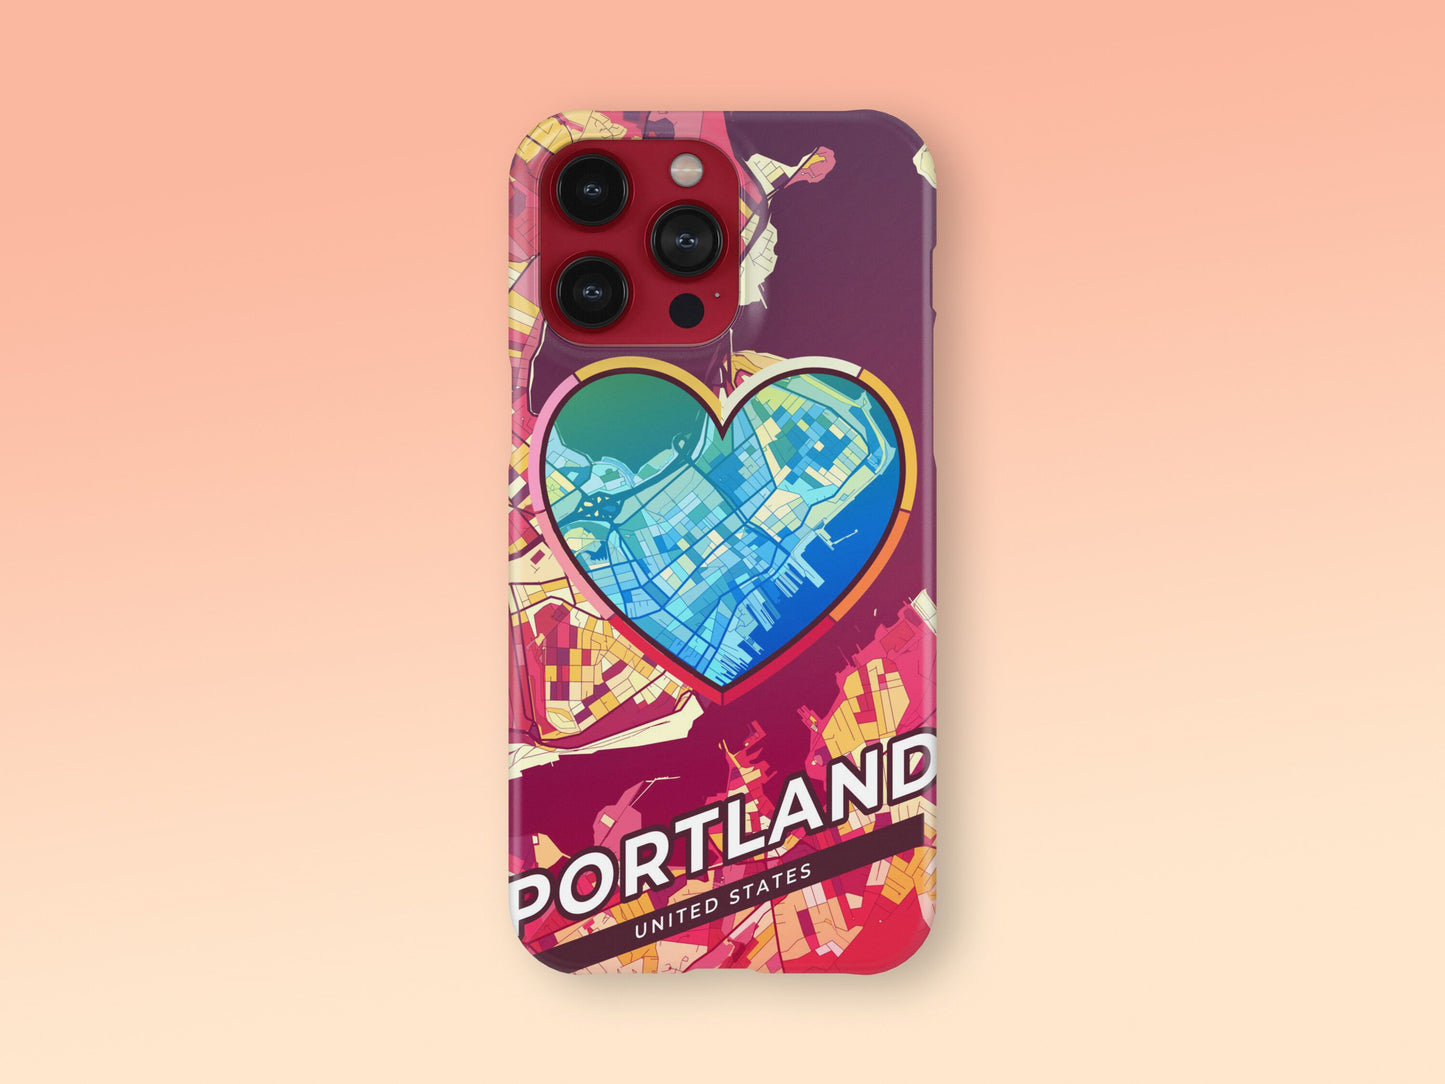 Portland Maine slim phone case with colorful icon 2